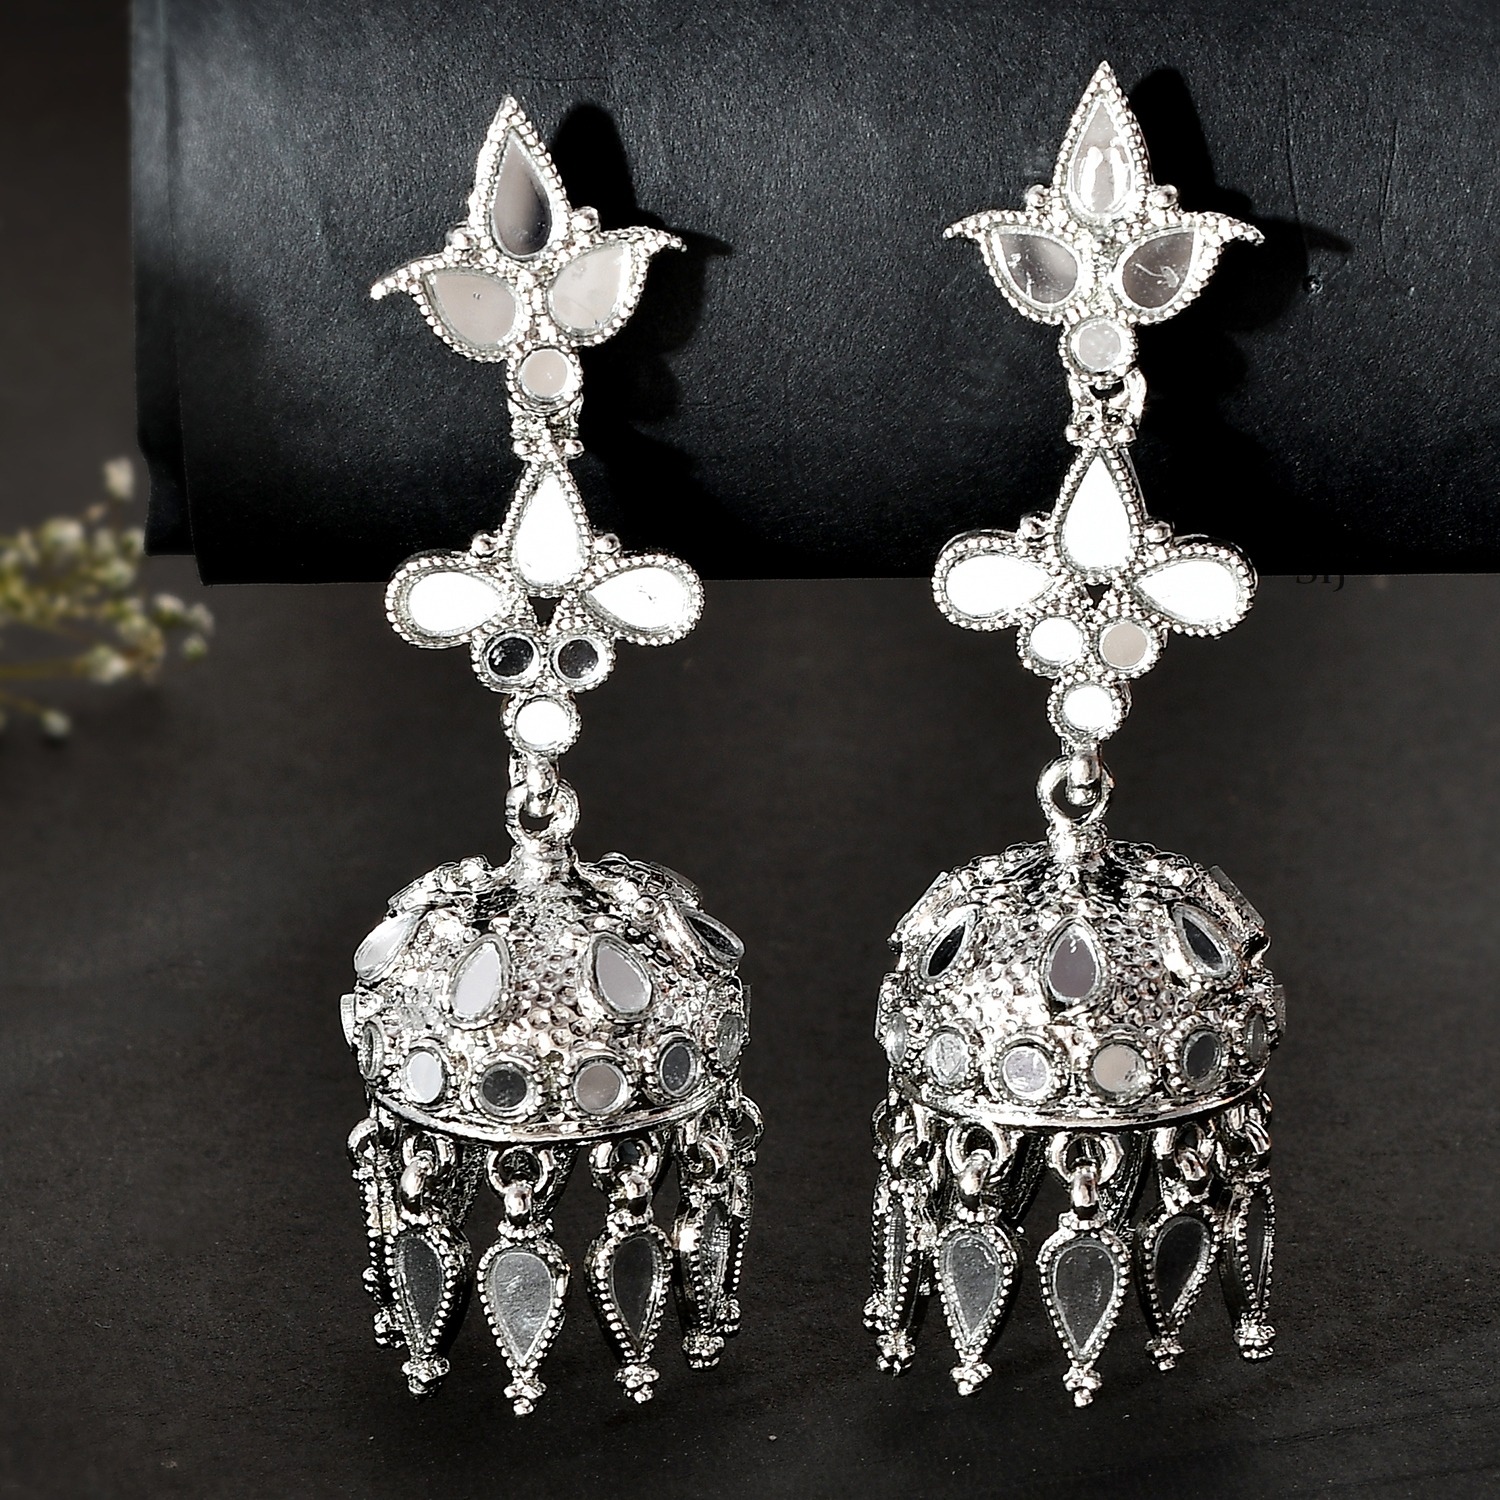 Mirror Studded Drop Earrings with Small Jhumkas